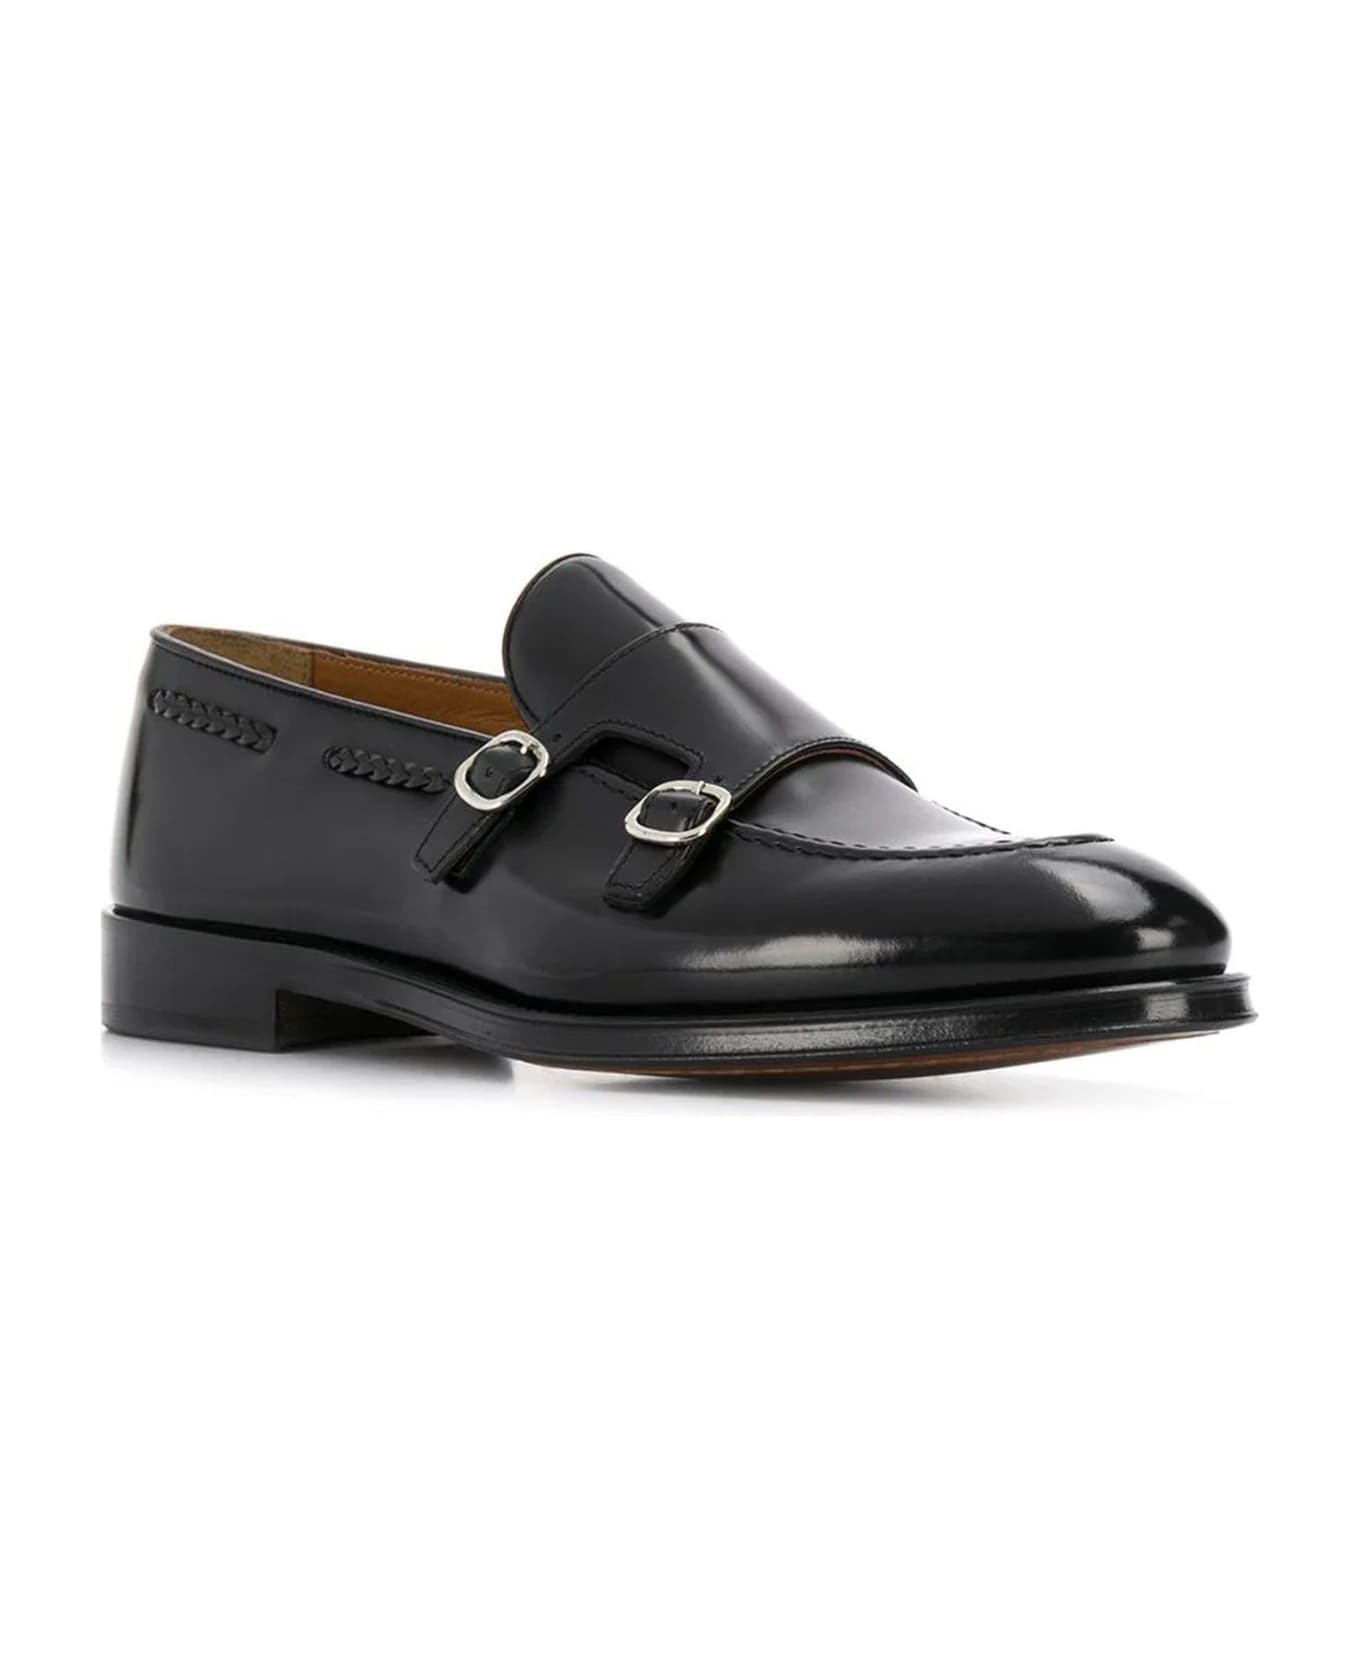 Doucal's Black Leather Polished Monk Shoes - Black